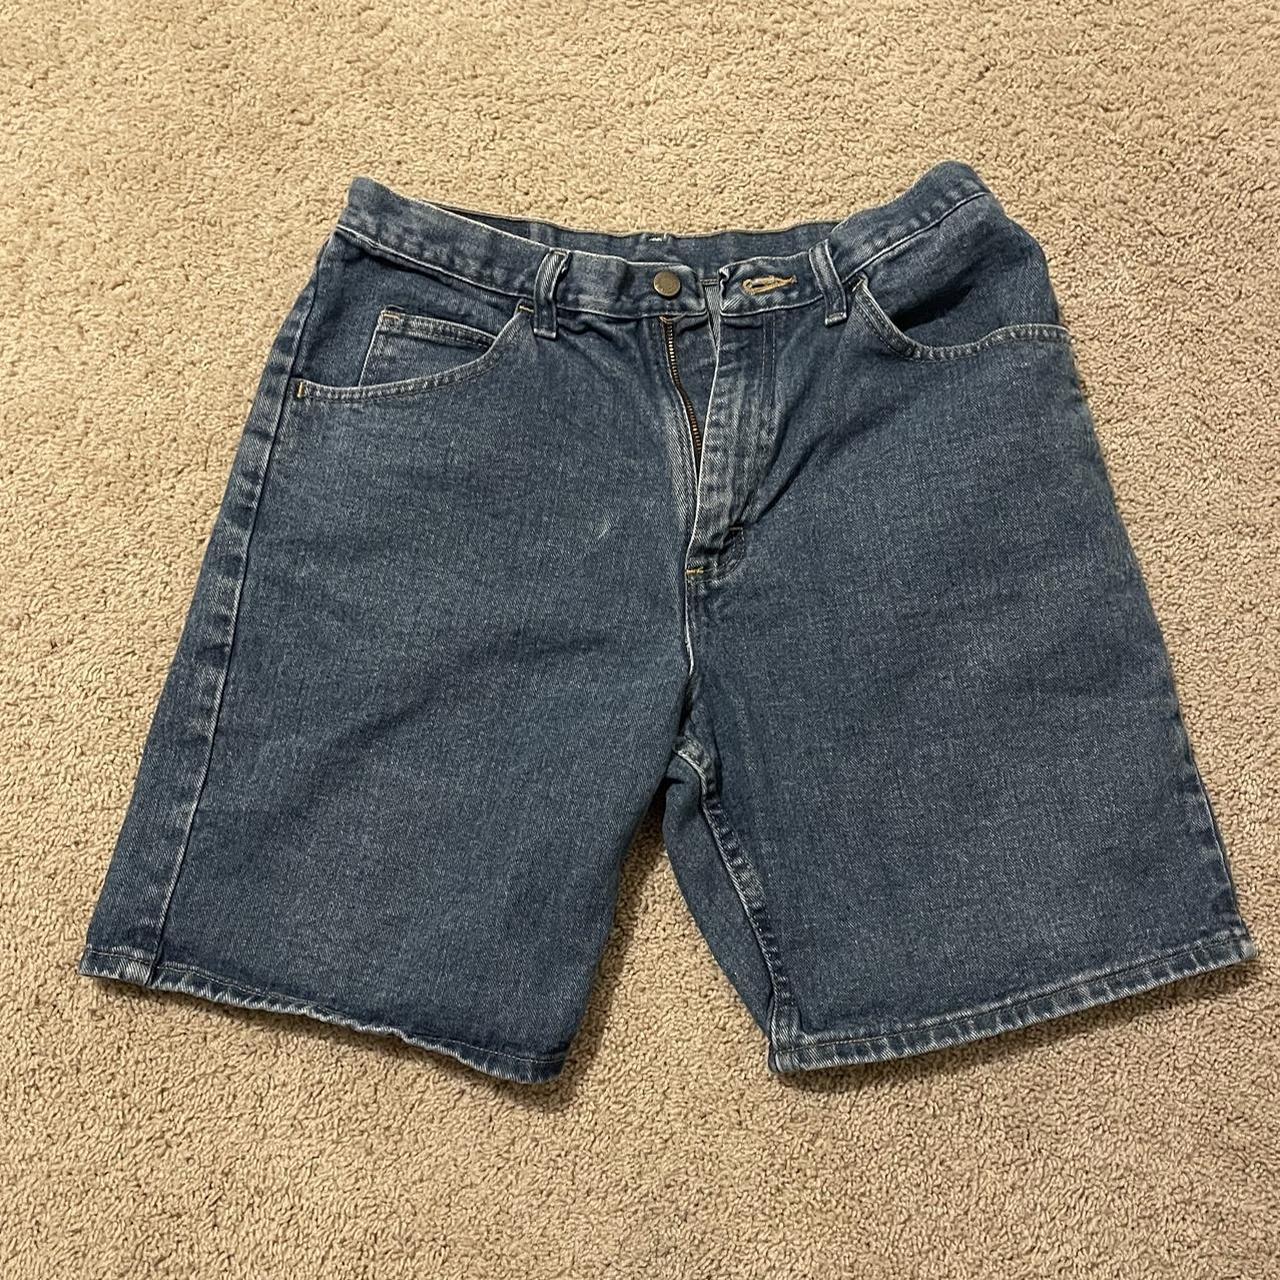 wrangler relaxed fit jean shorts size 33. great... - Depop